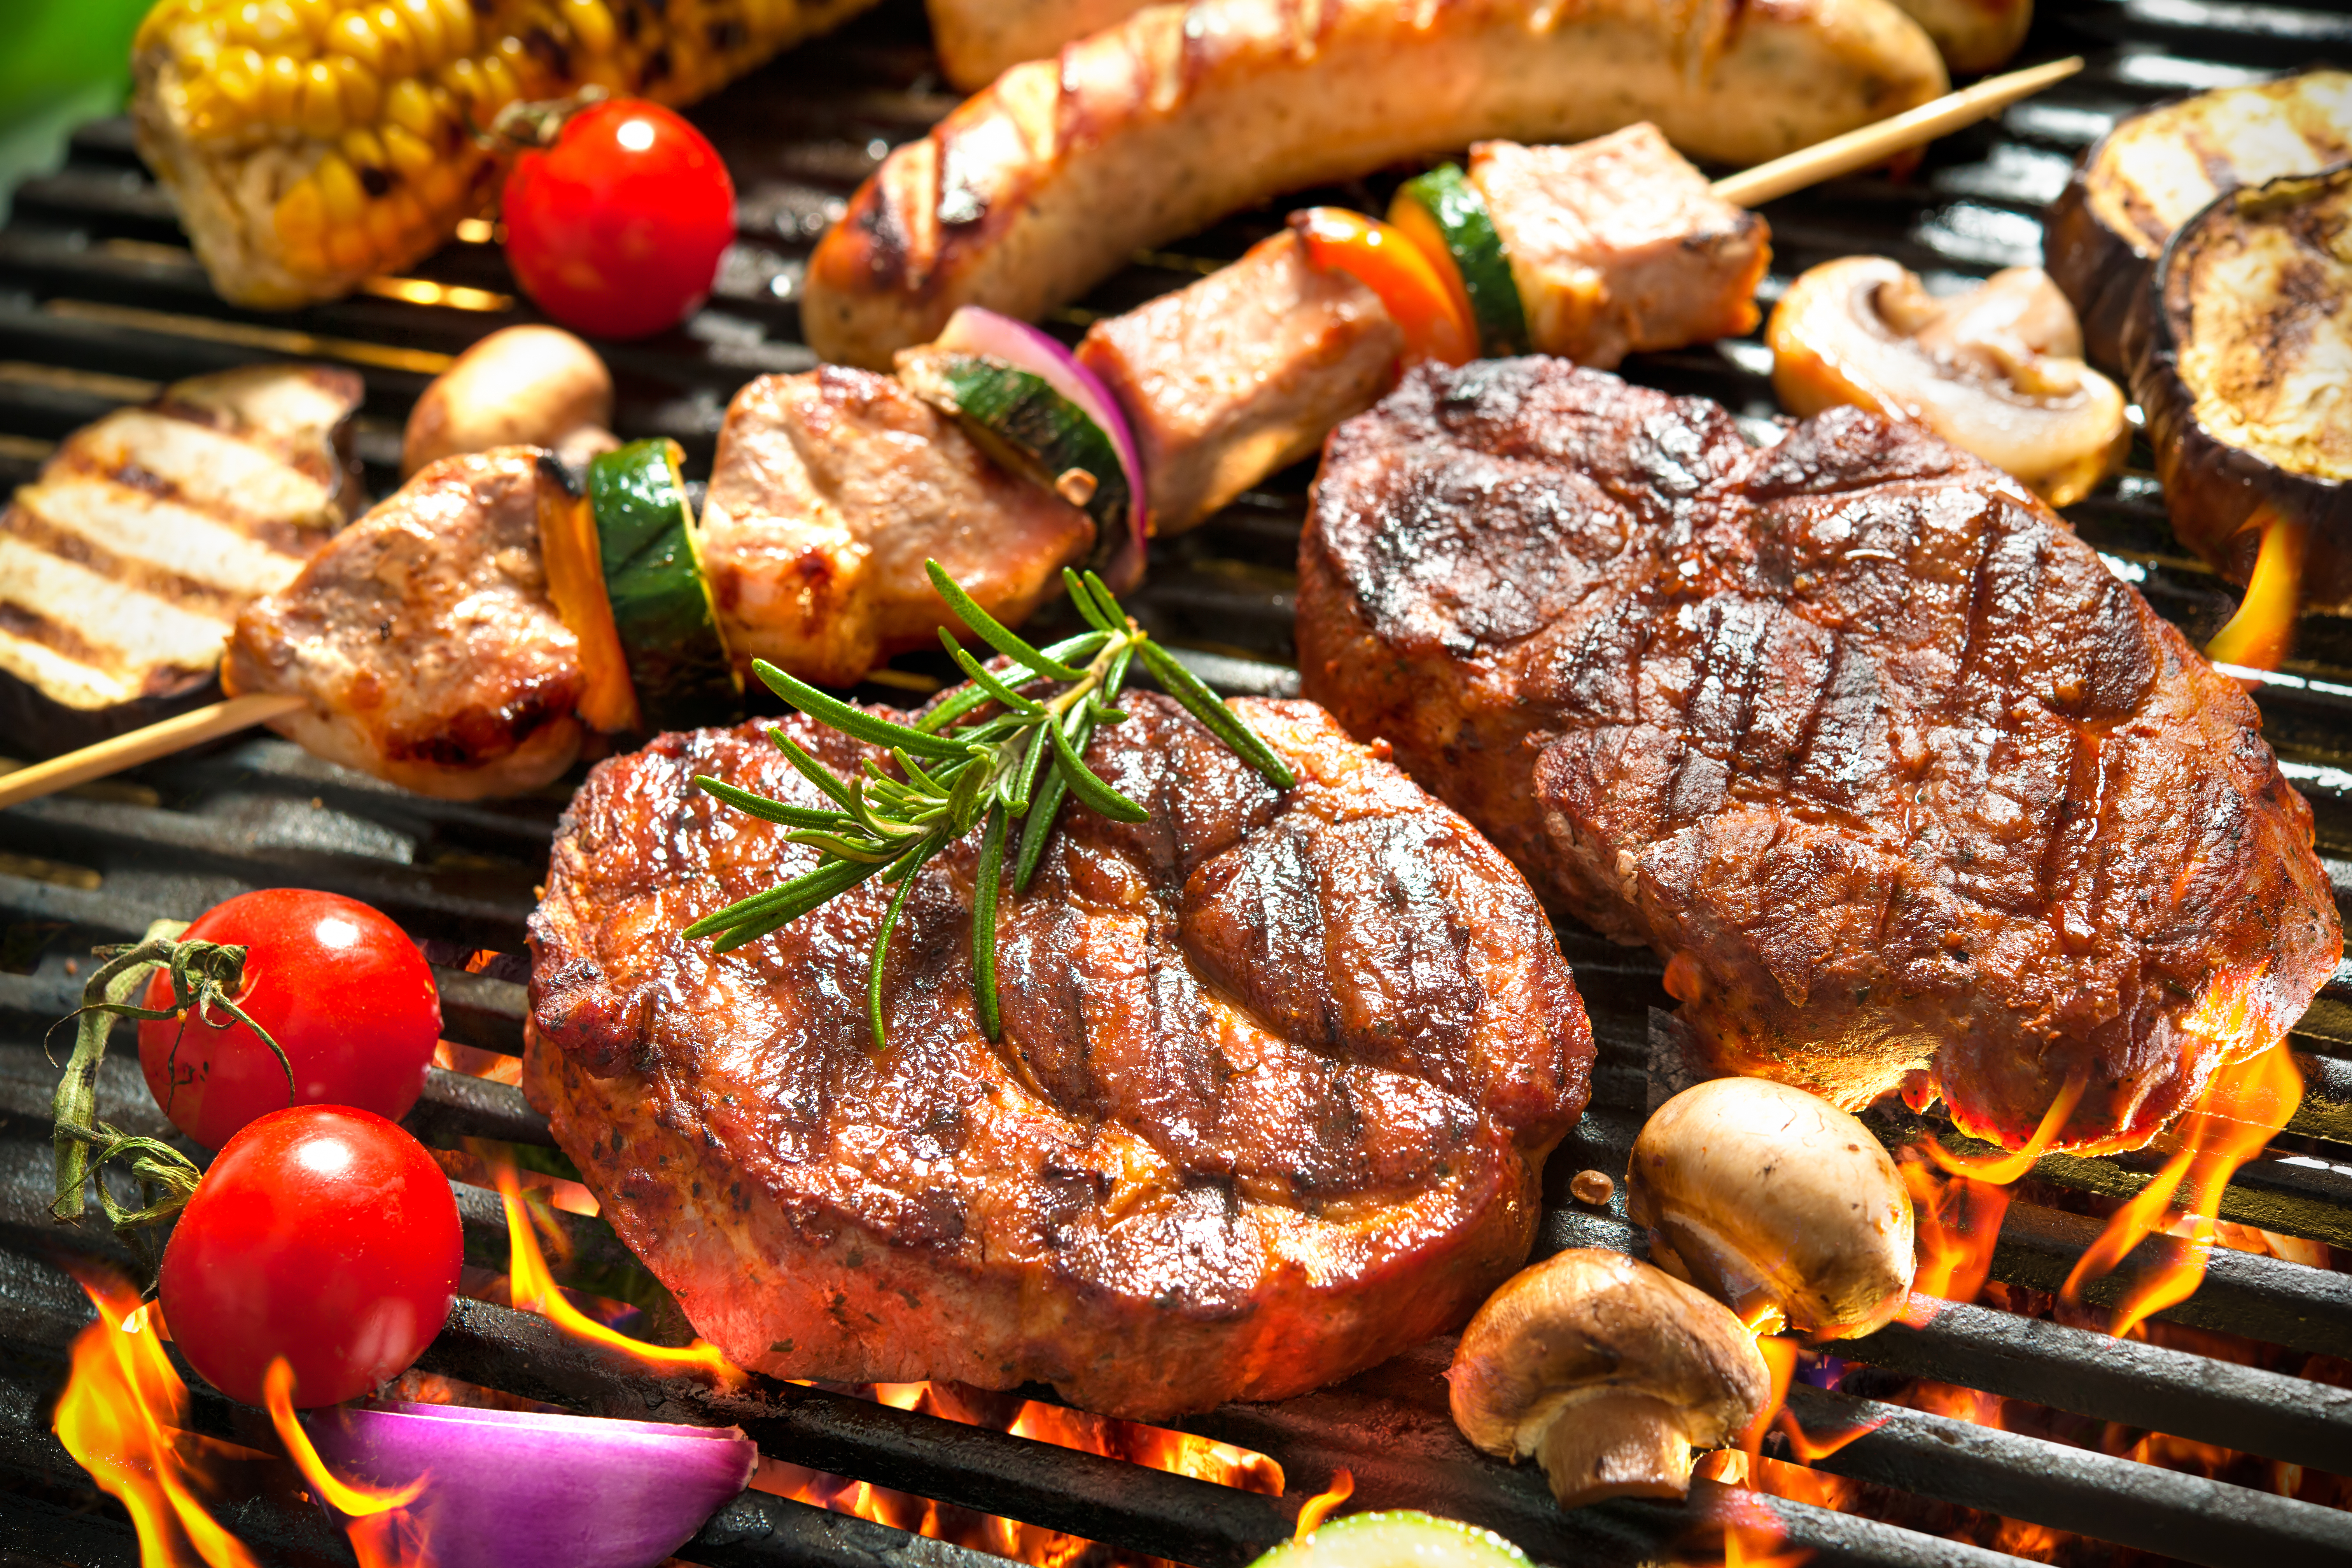 Some barbecue meat cooking on a grill | Source: Shutterstock